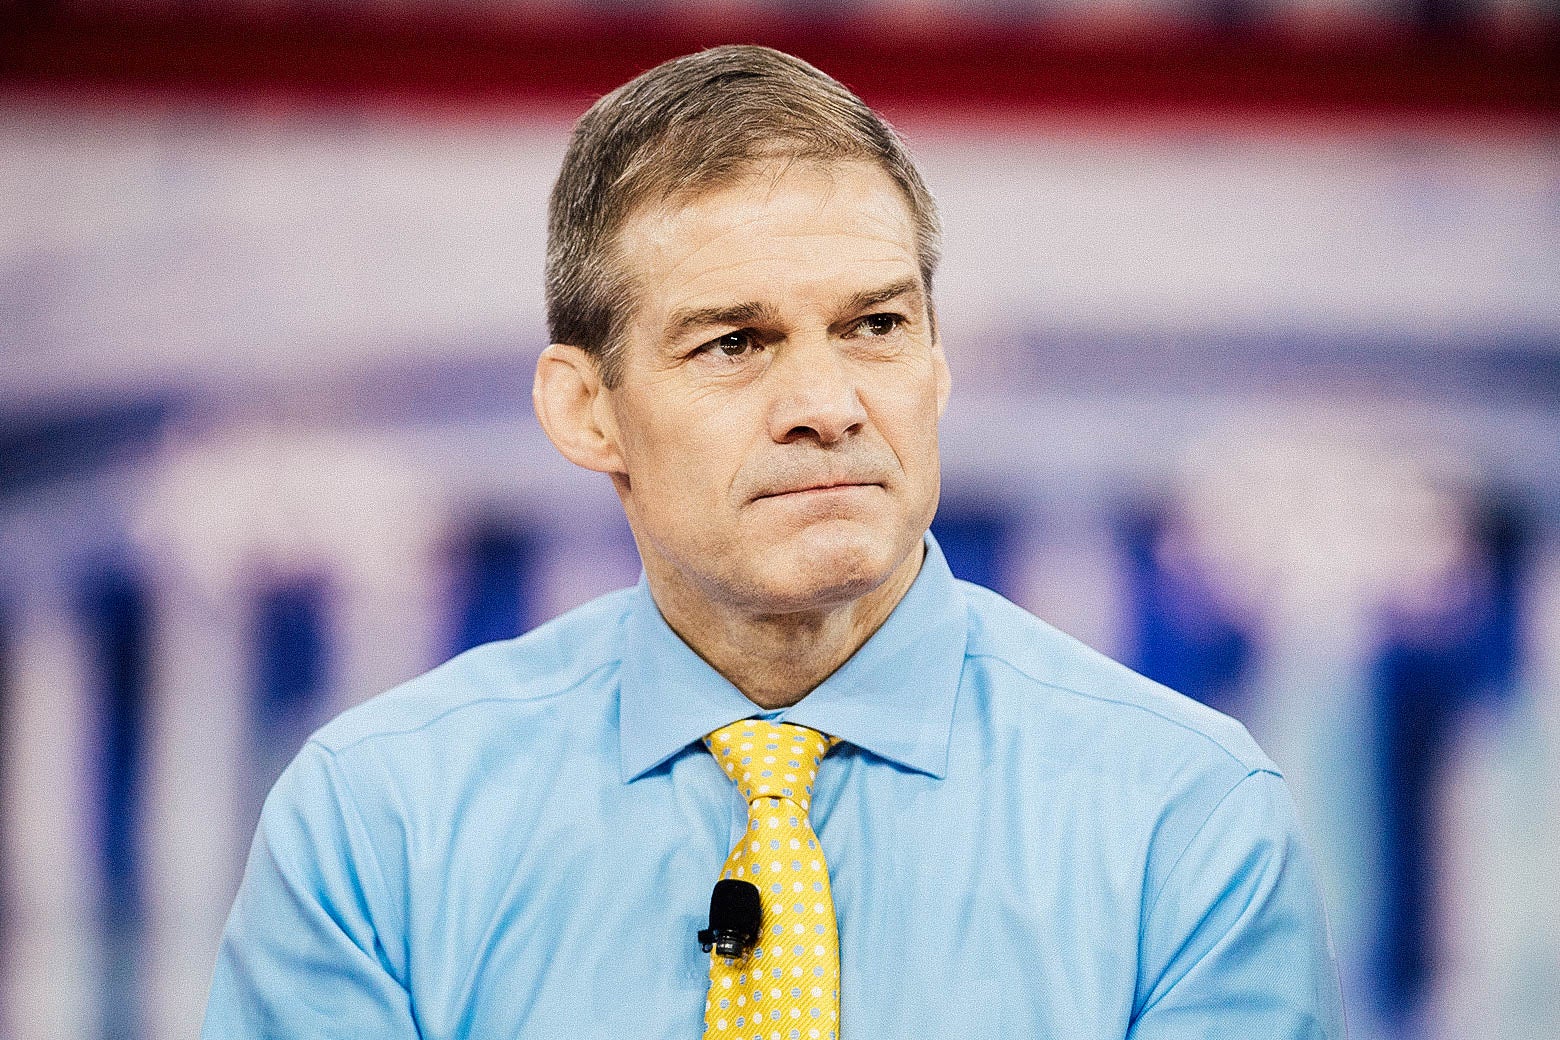 Ohio Rep. Jim Jordan, as seen at the Conservative Political Action Conference in Oxon Hill, Maryland.